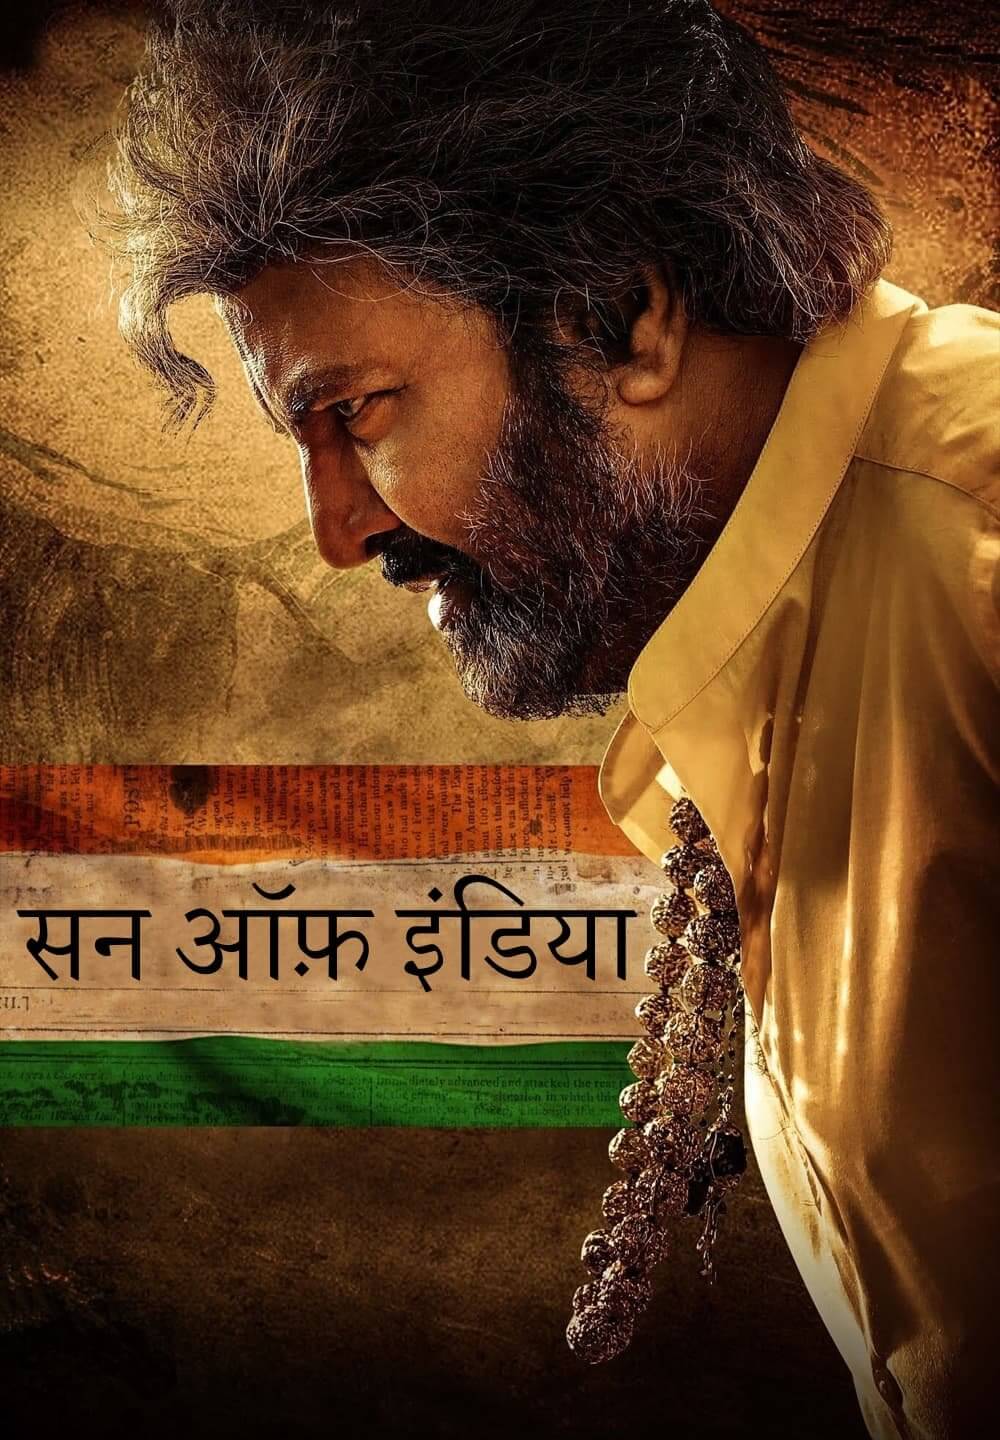 Son Of India (2022) Hindi Dubbed 1080p WEB-DL 1.3GB Free Download